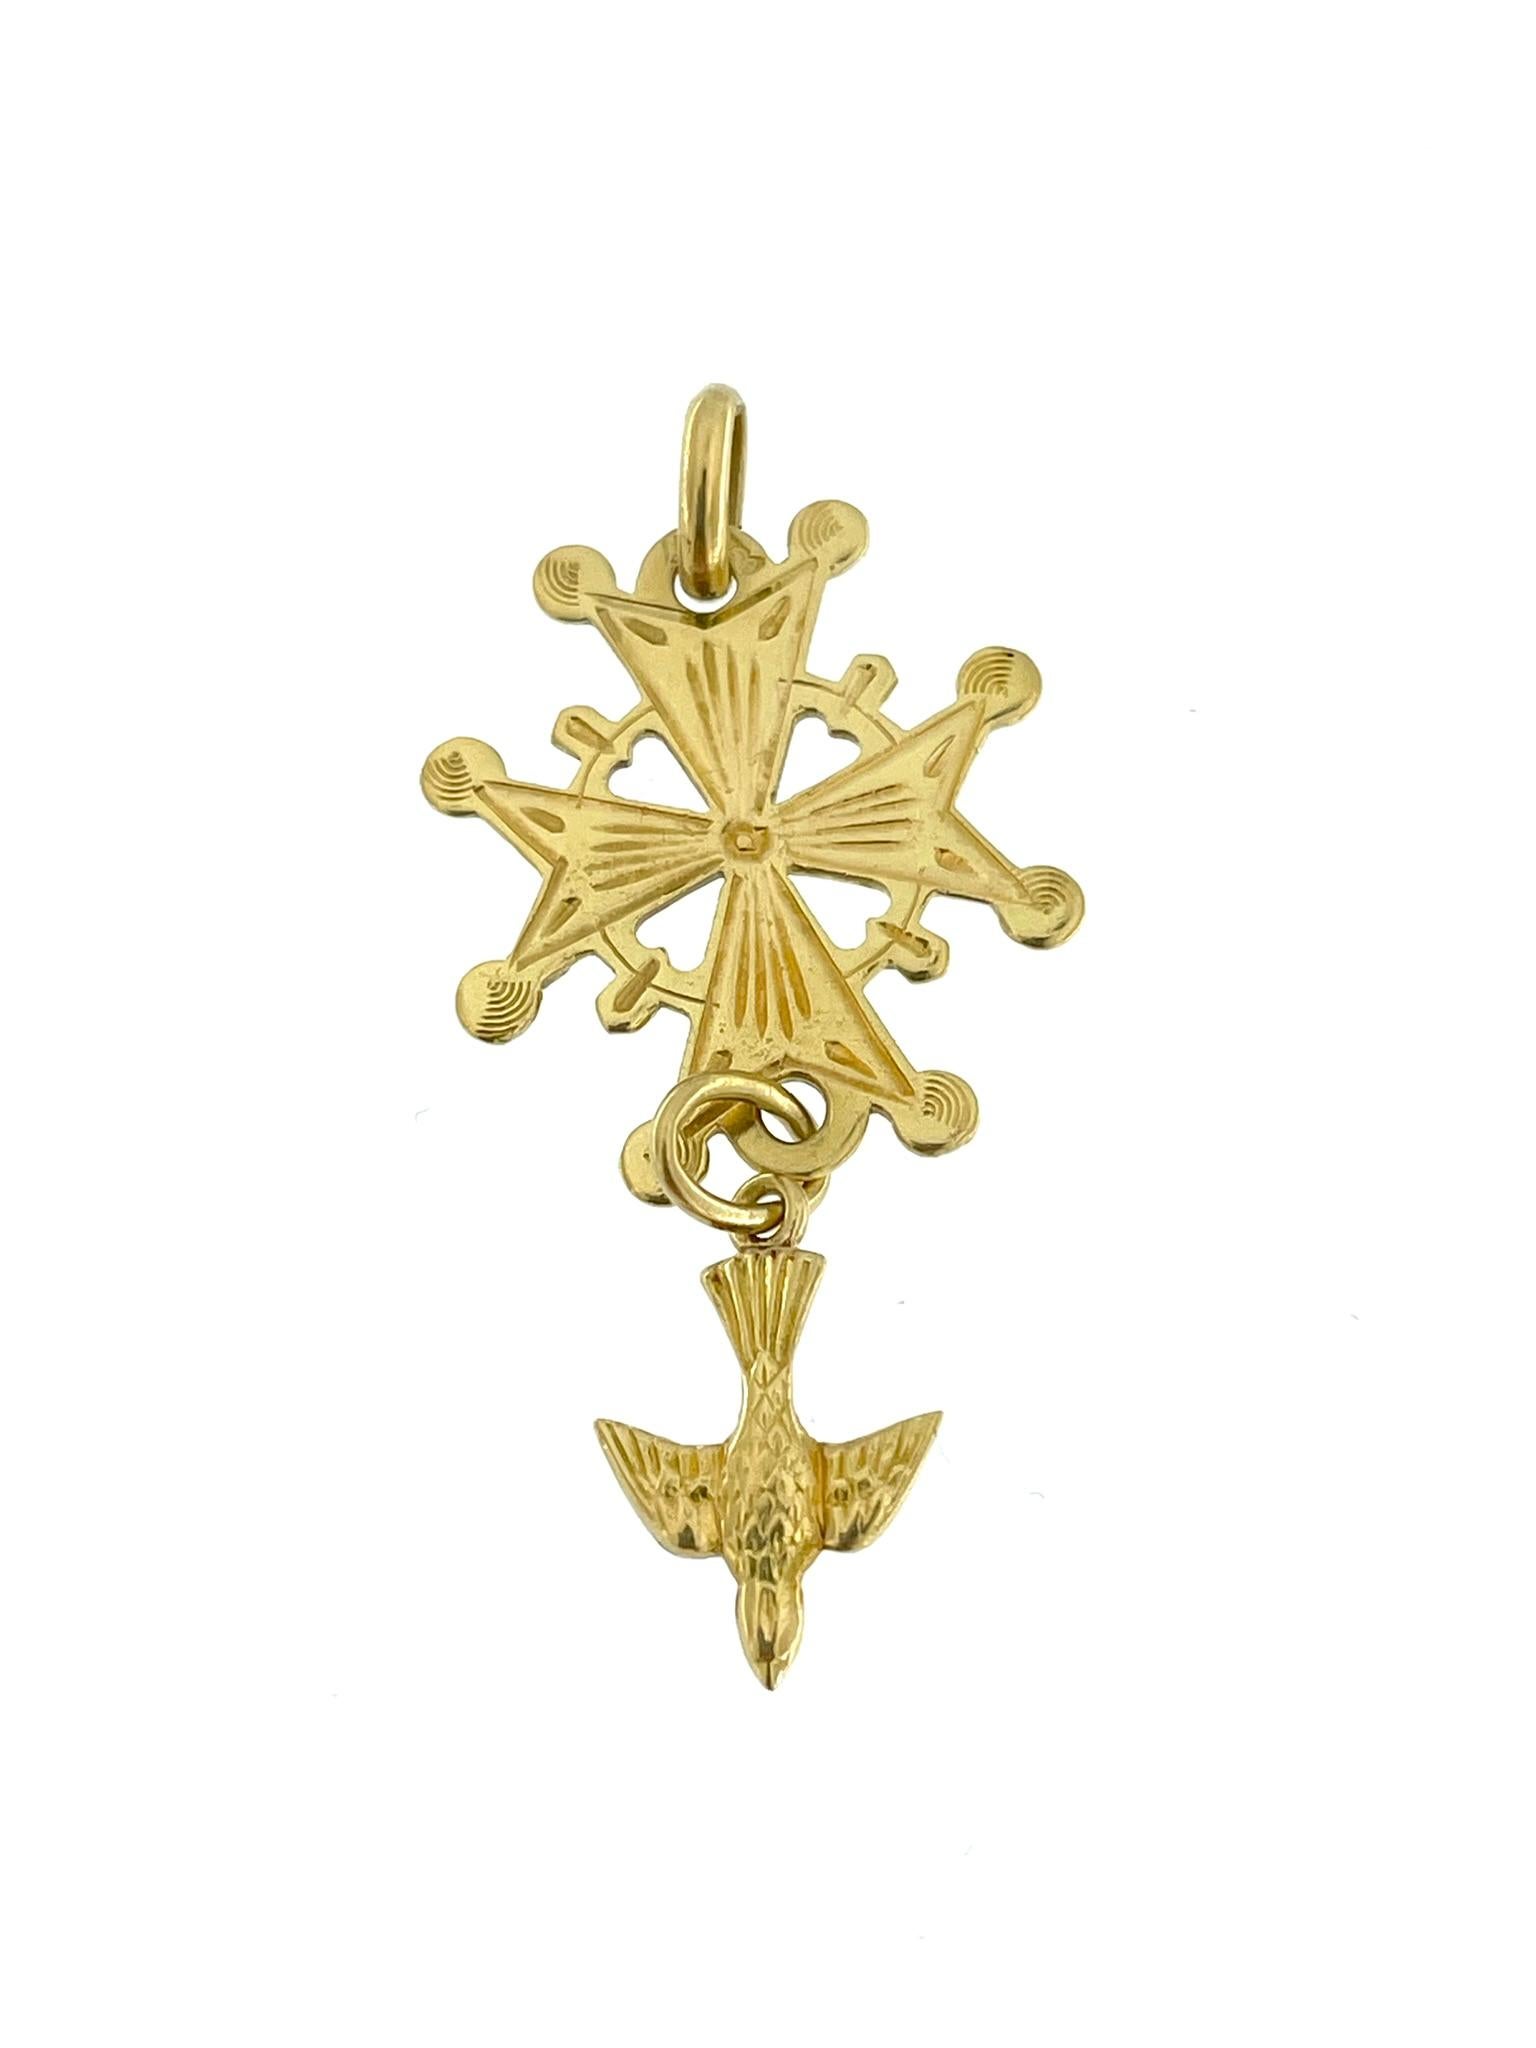 The Maltese Cross with Dove crafted in 18 karat Yellow Gold is an exquisite piece of jewelry characterized by its intricate relief work. The Maltese Cross, a symbol associated with various historical and cultural significances, is the focal point of